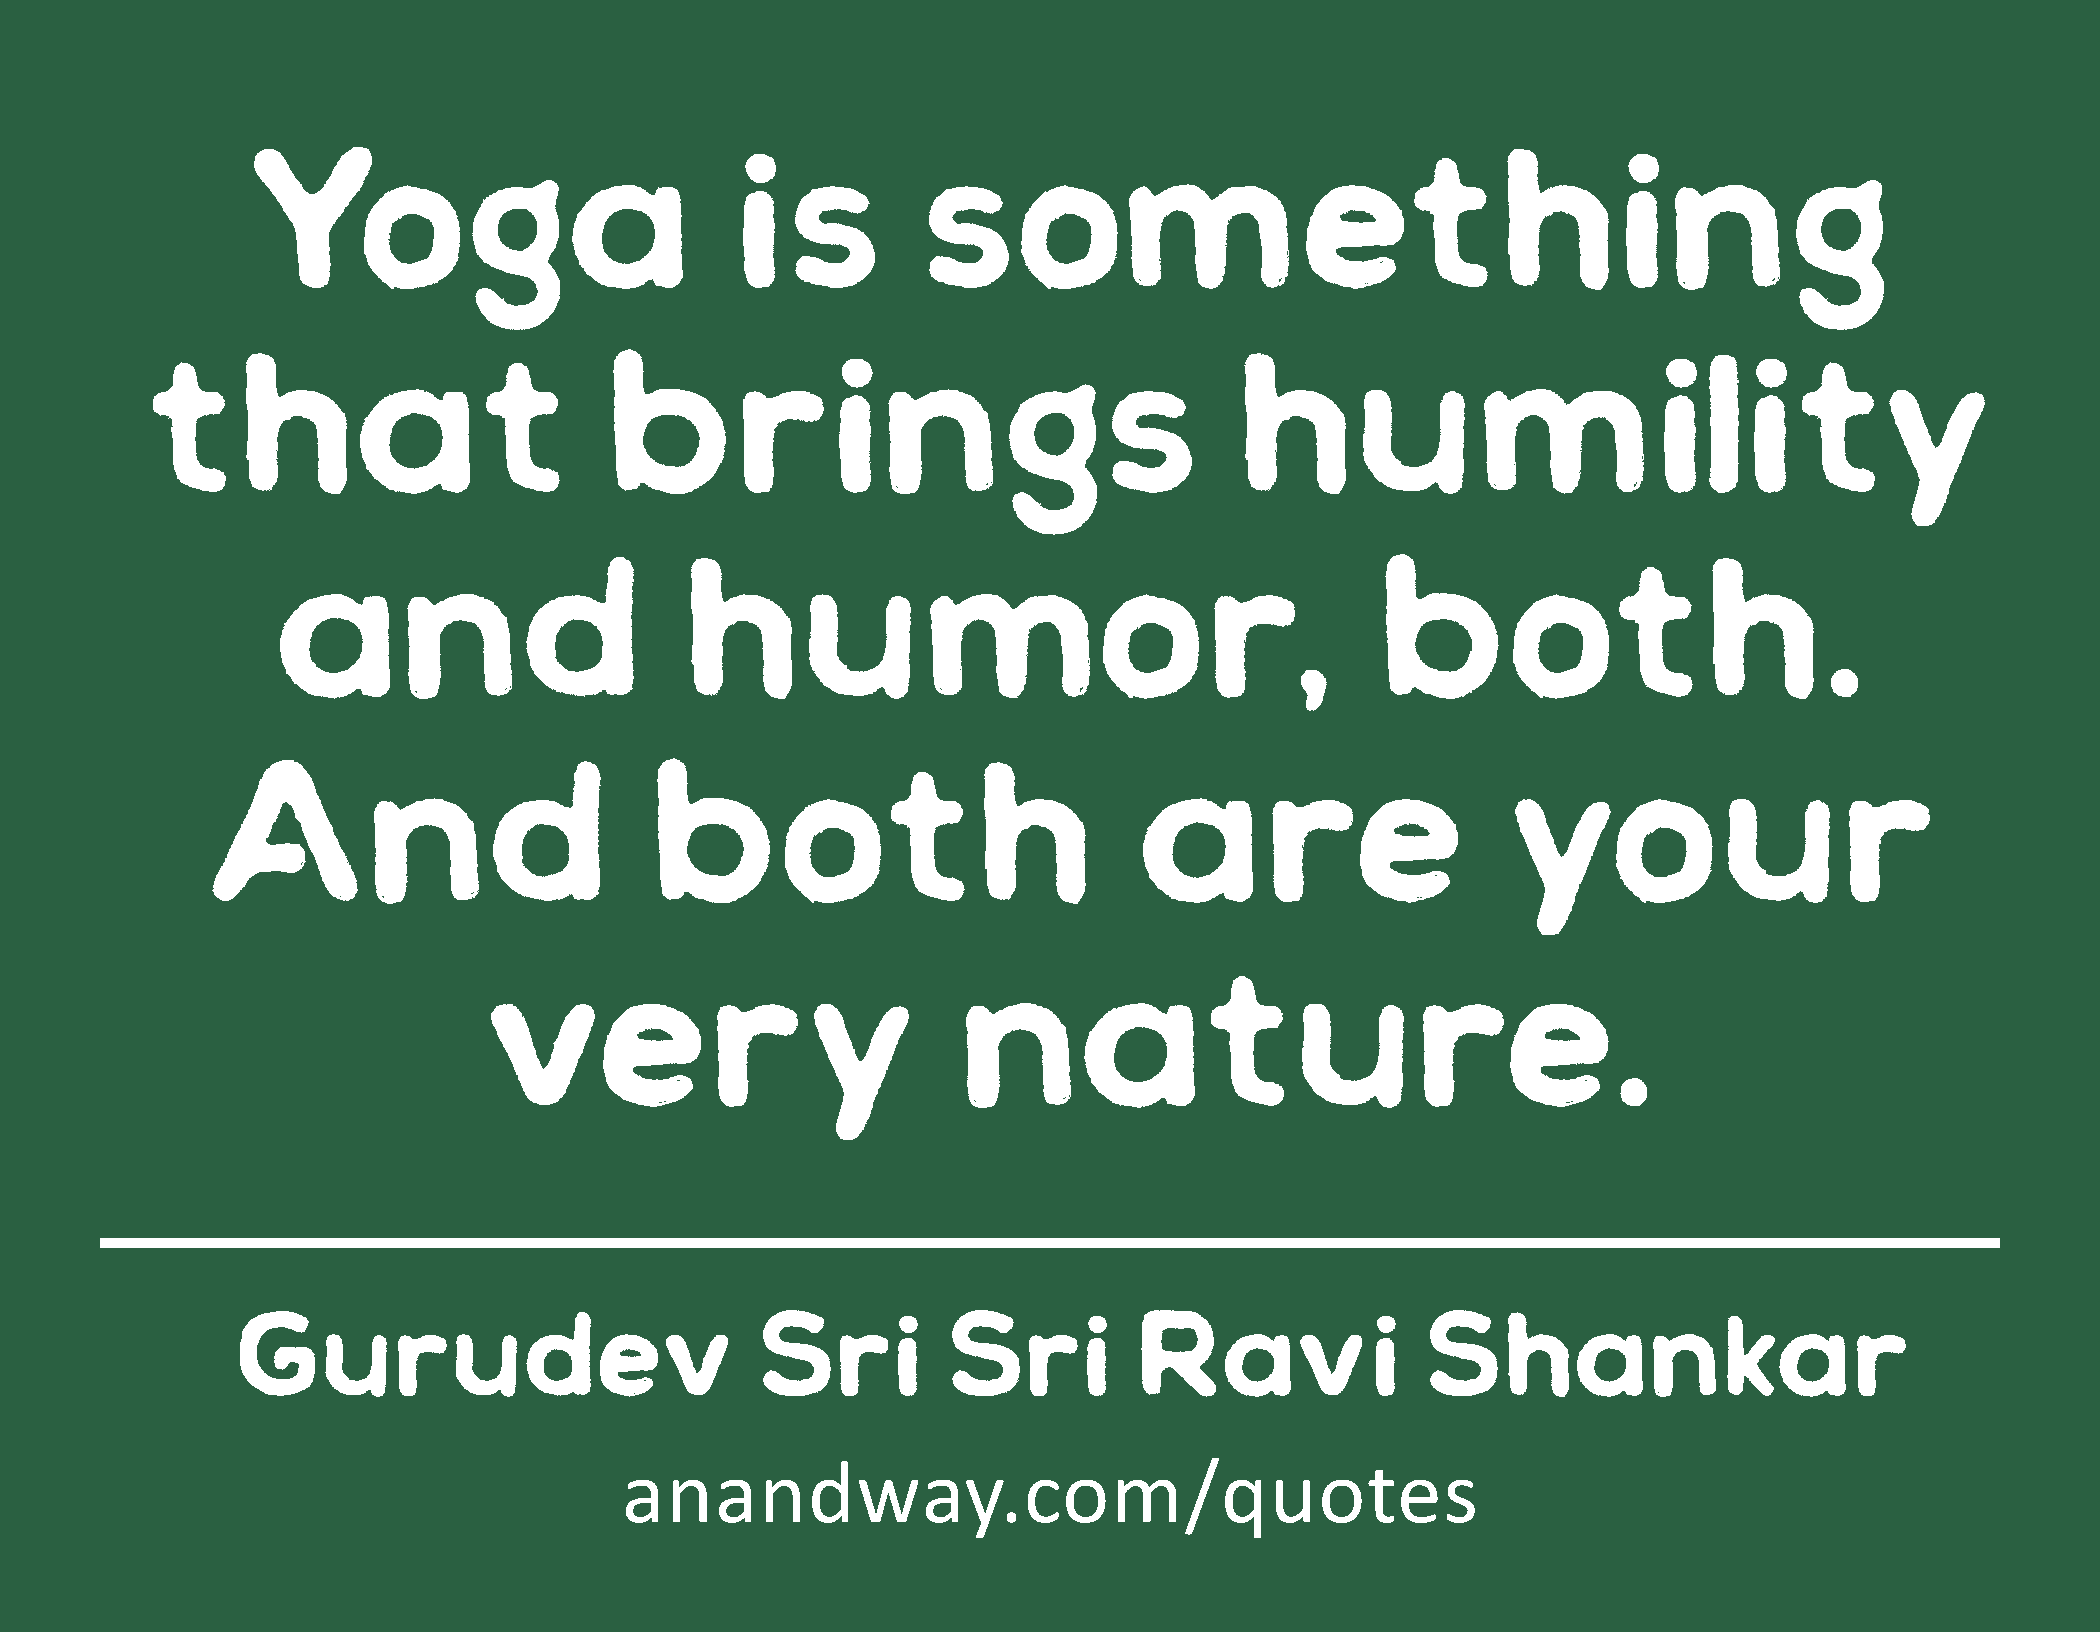 Yoga is something that brings humility and humor, both. And both are your very nature.
 -Gurudev Sri Sri Ravi Shankar